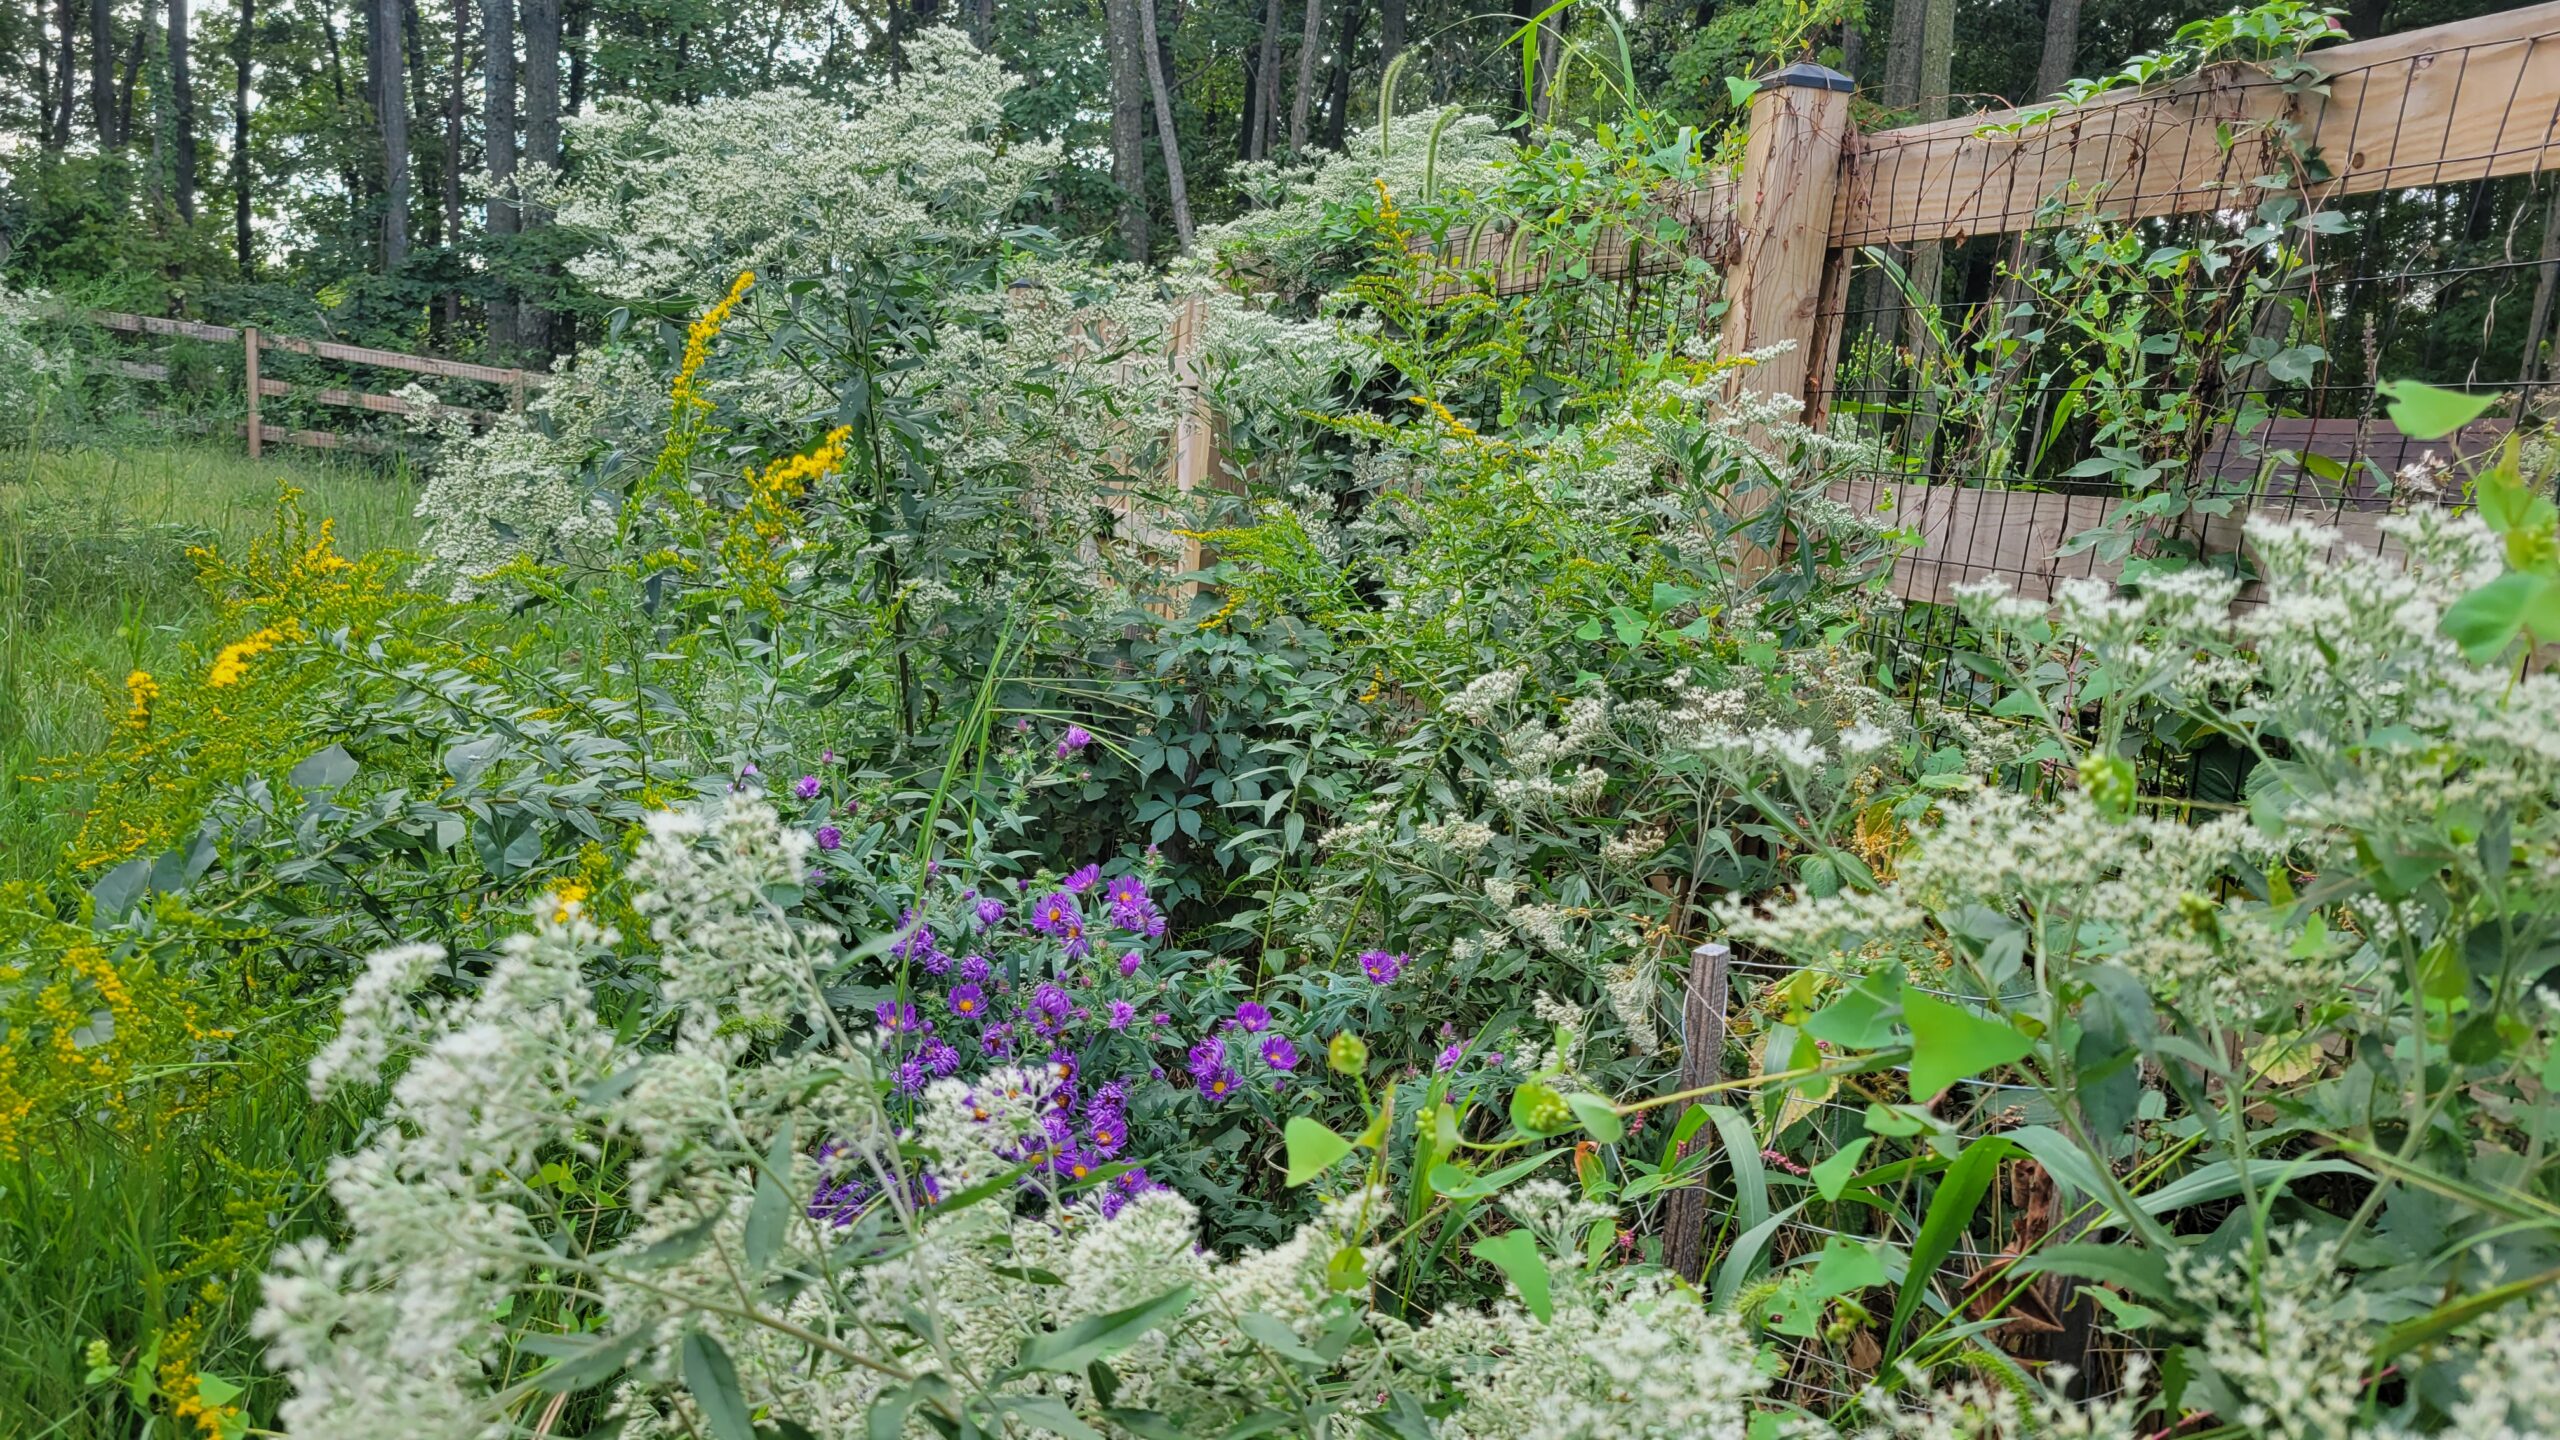 Photo of flowers, grasses, and weeds growing along a paddock fence. Plants include: late bonset, New York aster, goldenrod, bindweed, Virginia creeper.